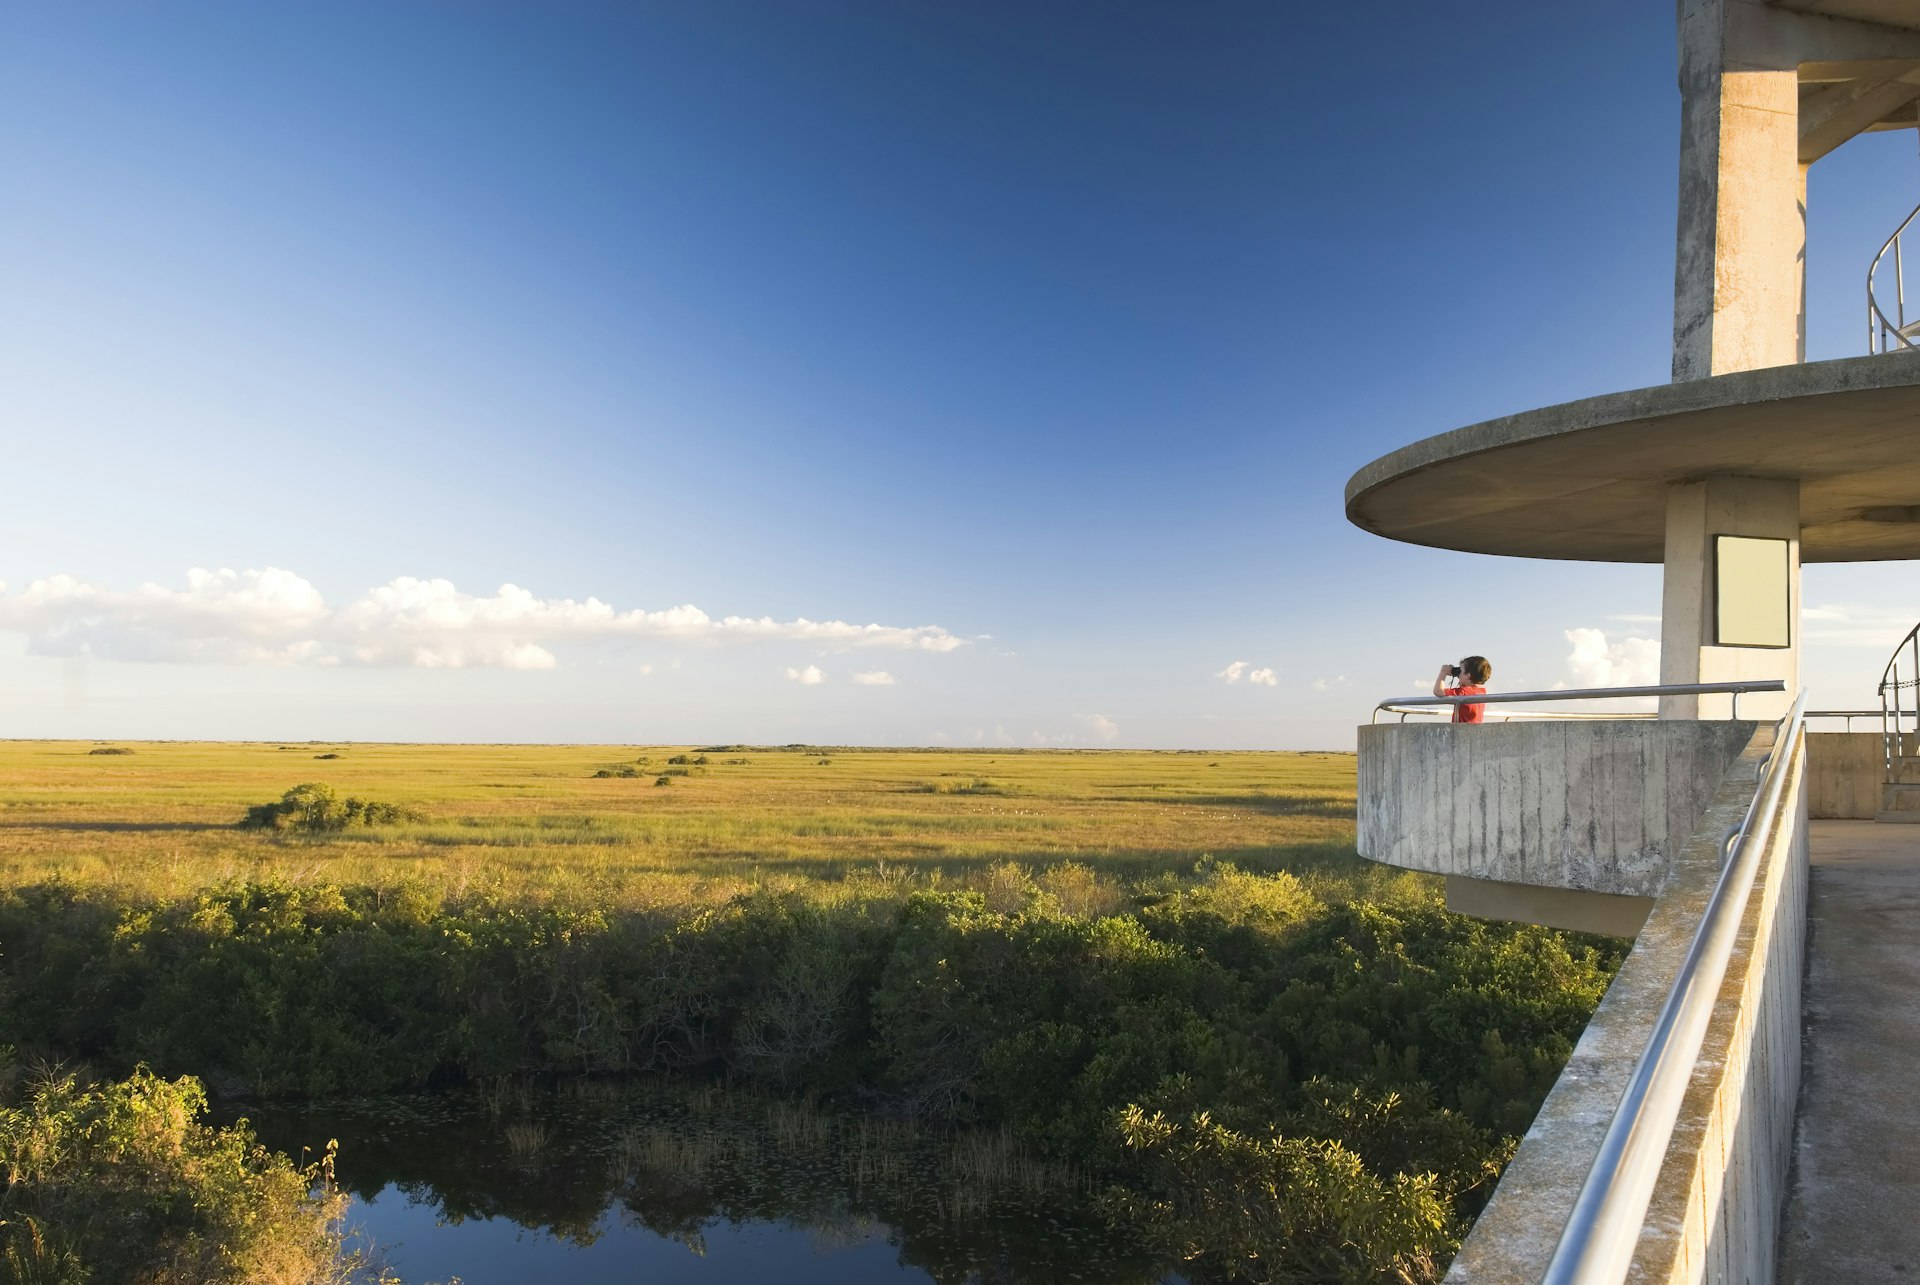 A boy looks out from the Shark Valley Observation Tower, Everglades National Park, Florida, USA